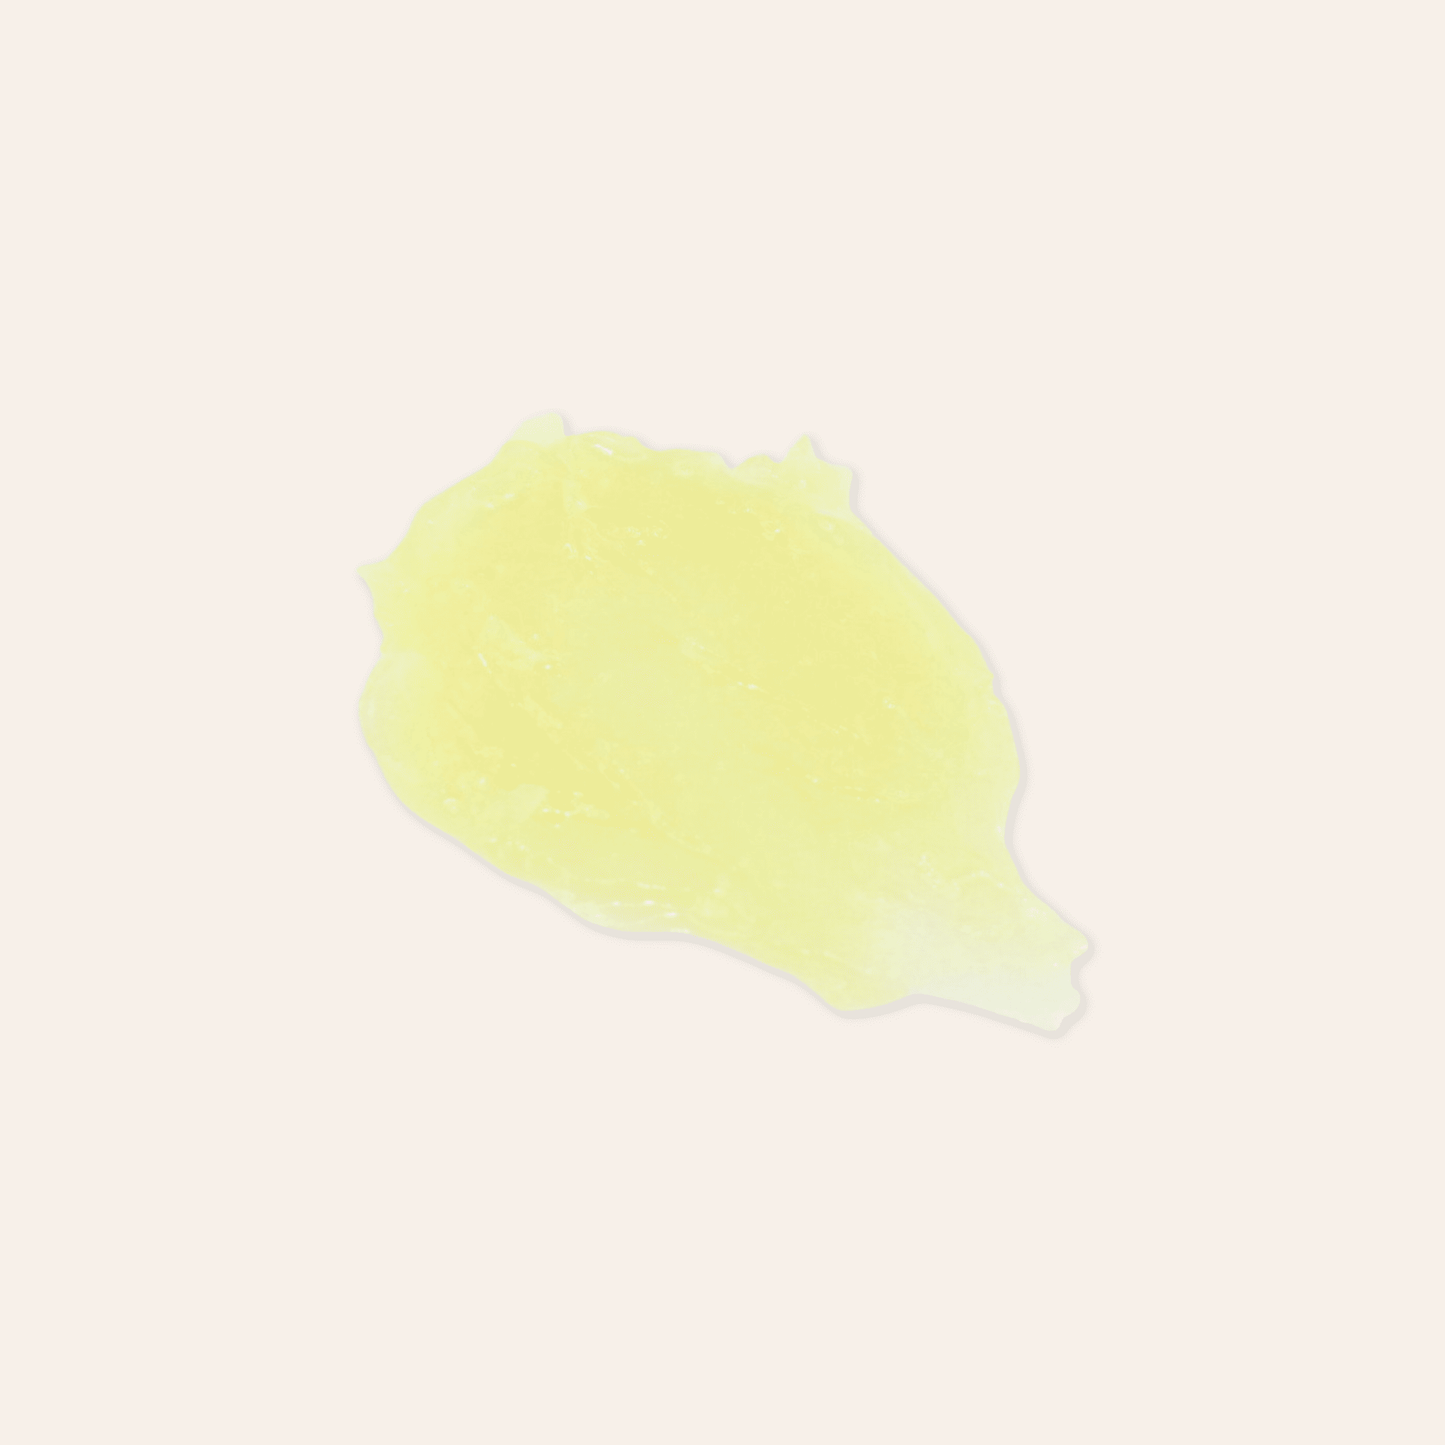 A yellow cosmetic swatch of Felin Lune Apothecary's Lavendula Salve.